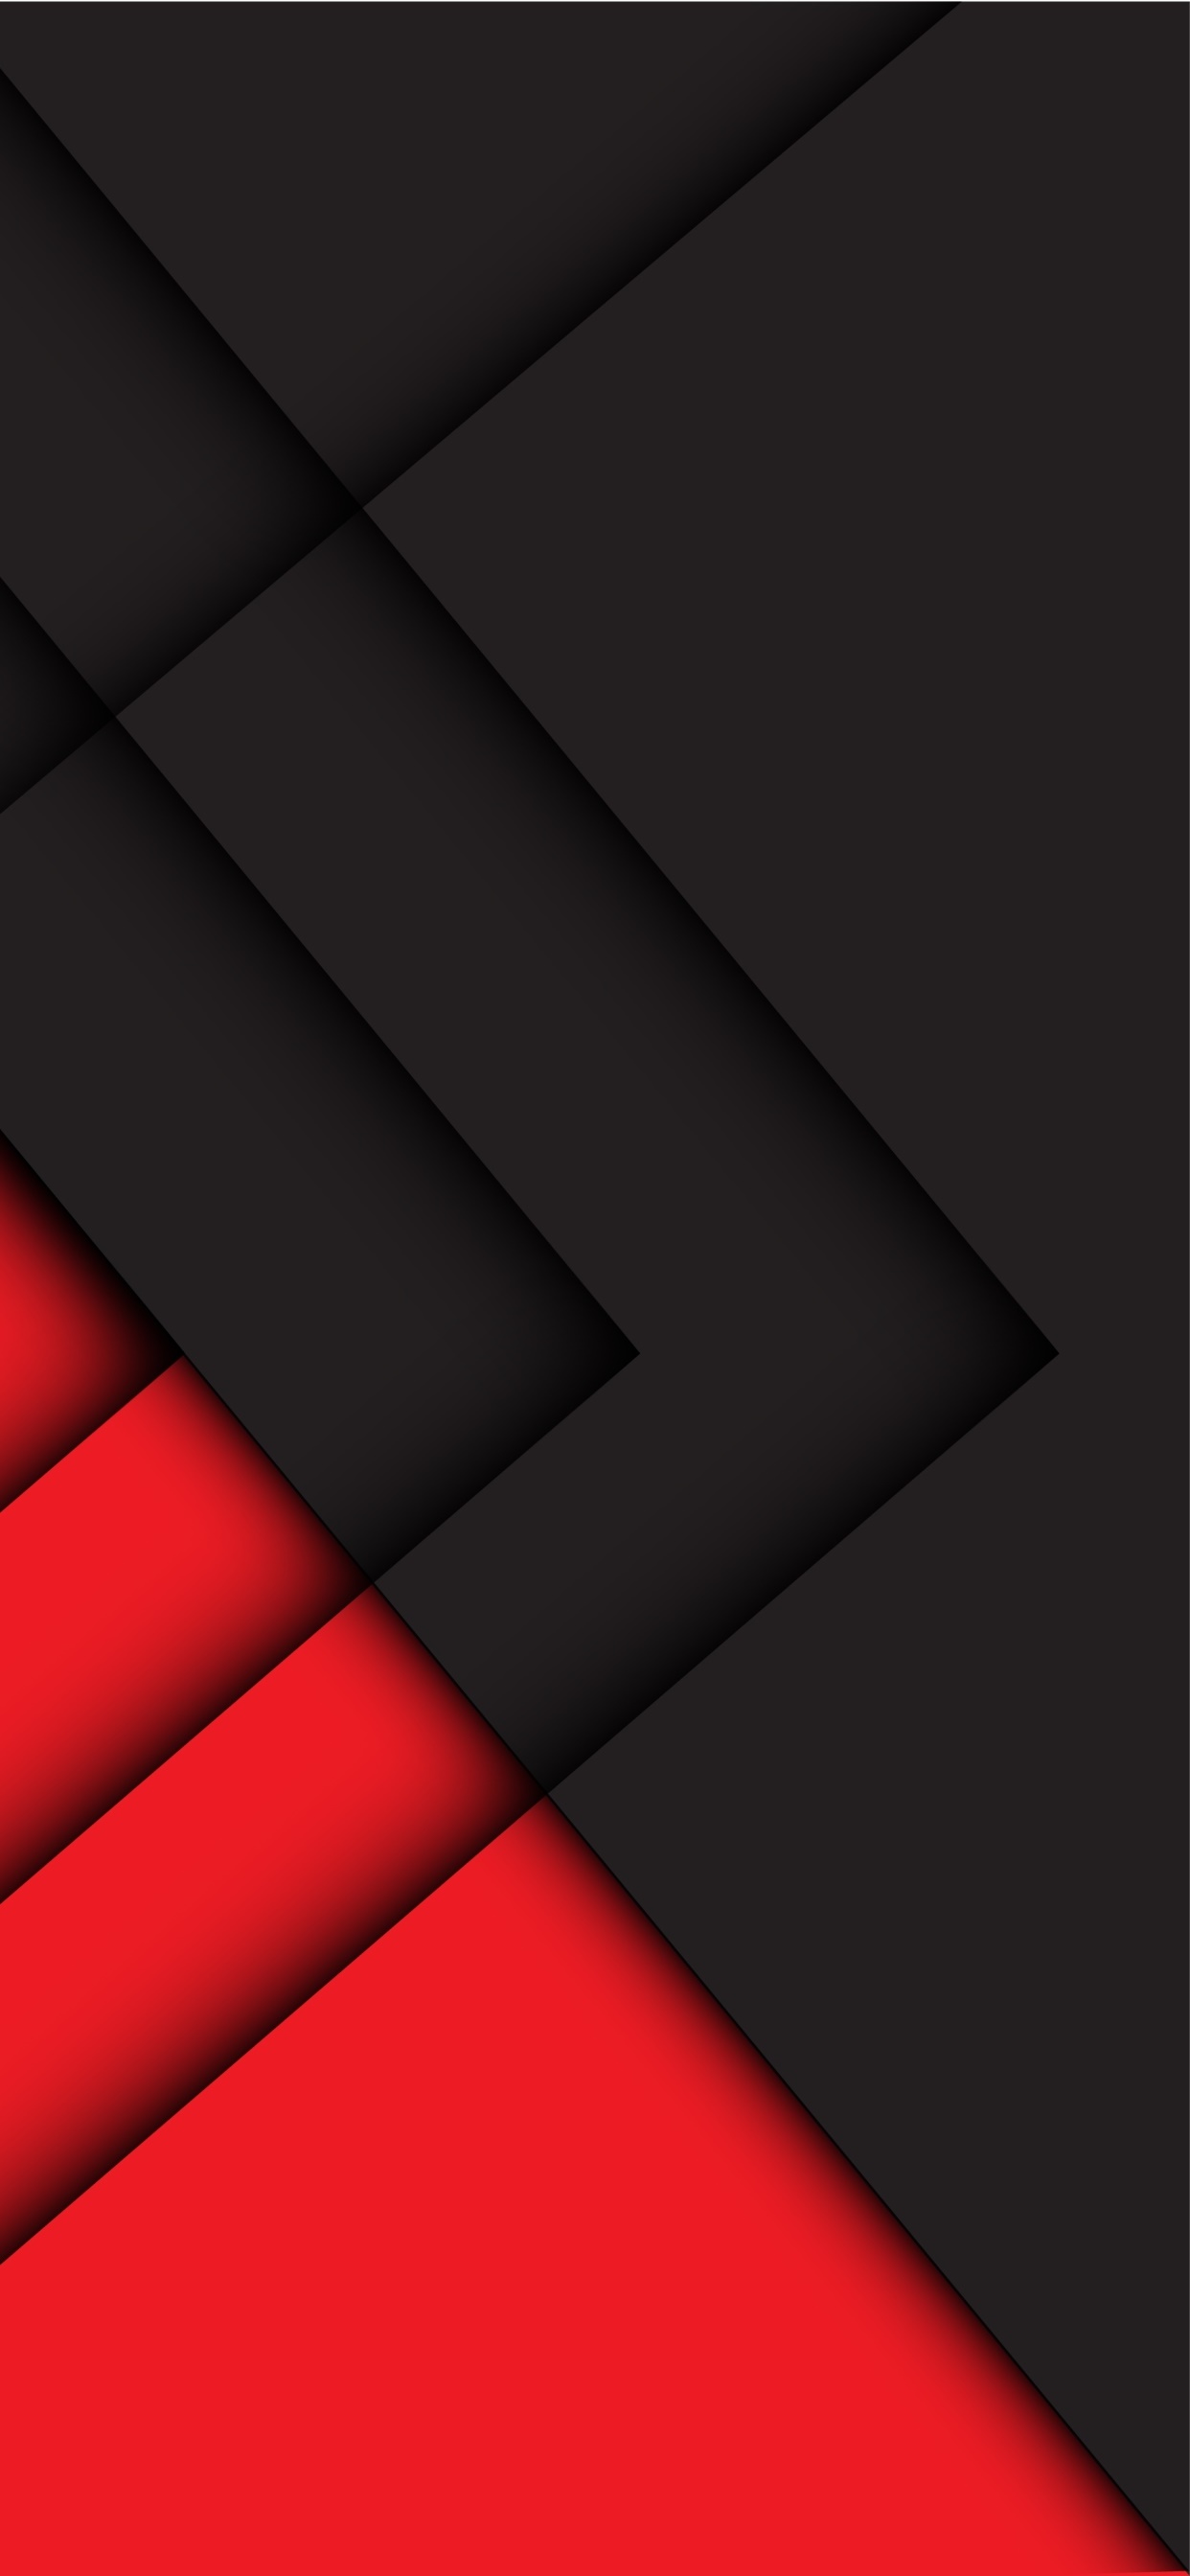 Wallpaper / Abstract Geometry Phone Wallpaper, Black, Shapes, Red, 1242x2688 free download